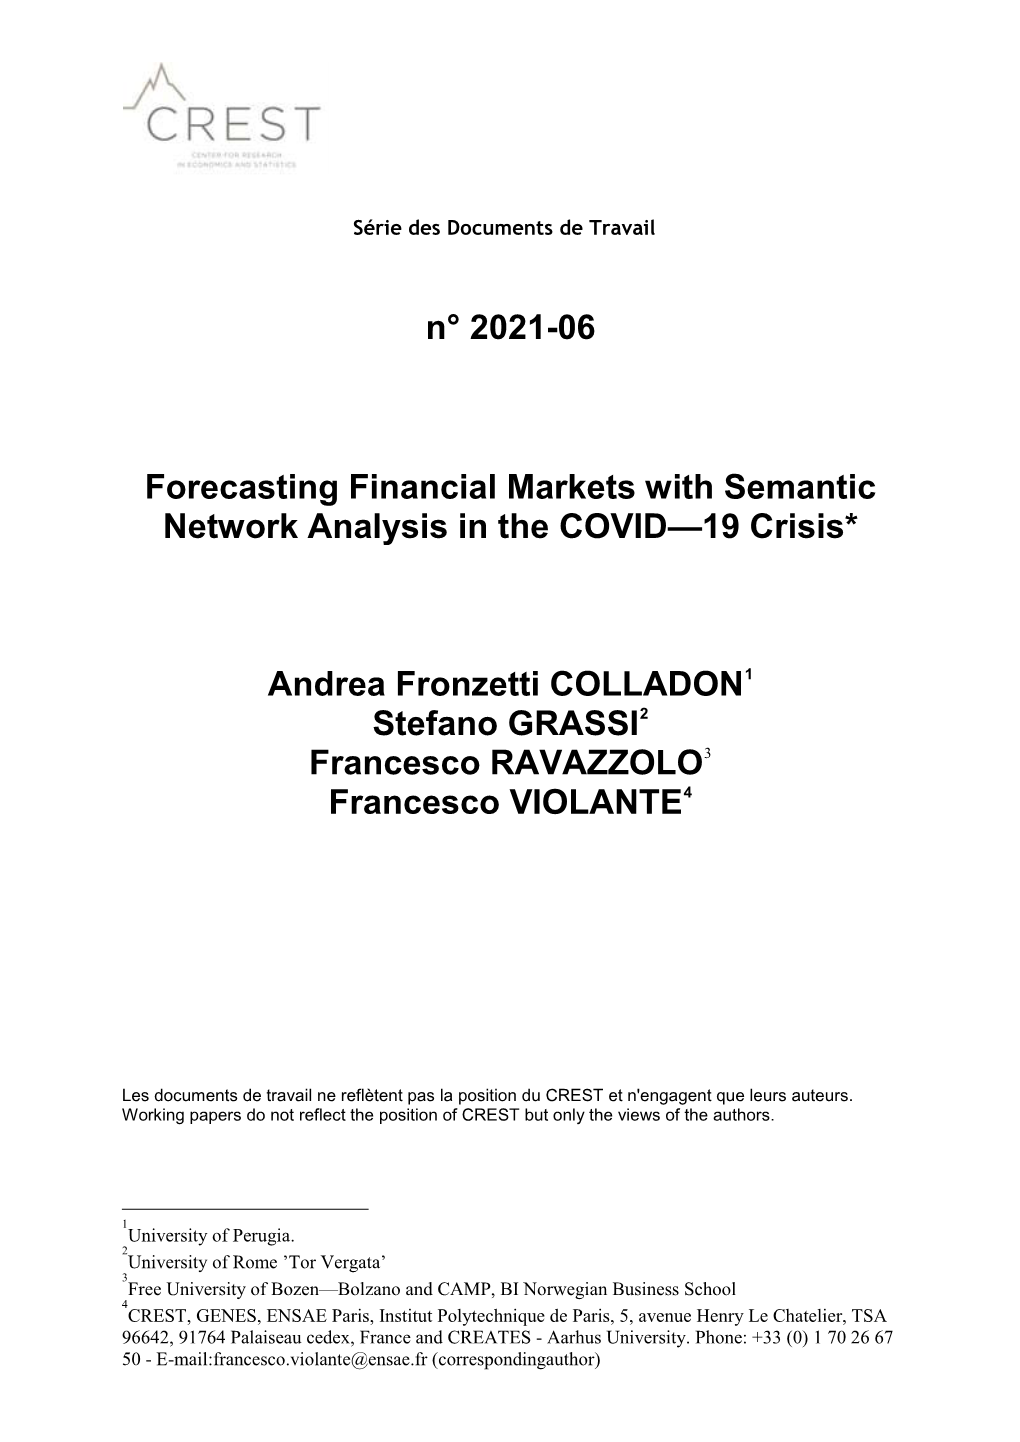 N° 2021-06 Forecasting Financial Markets with Semantic Network